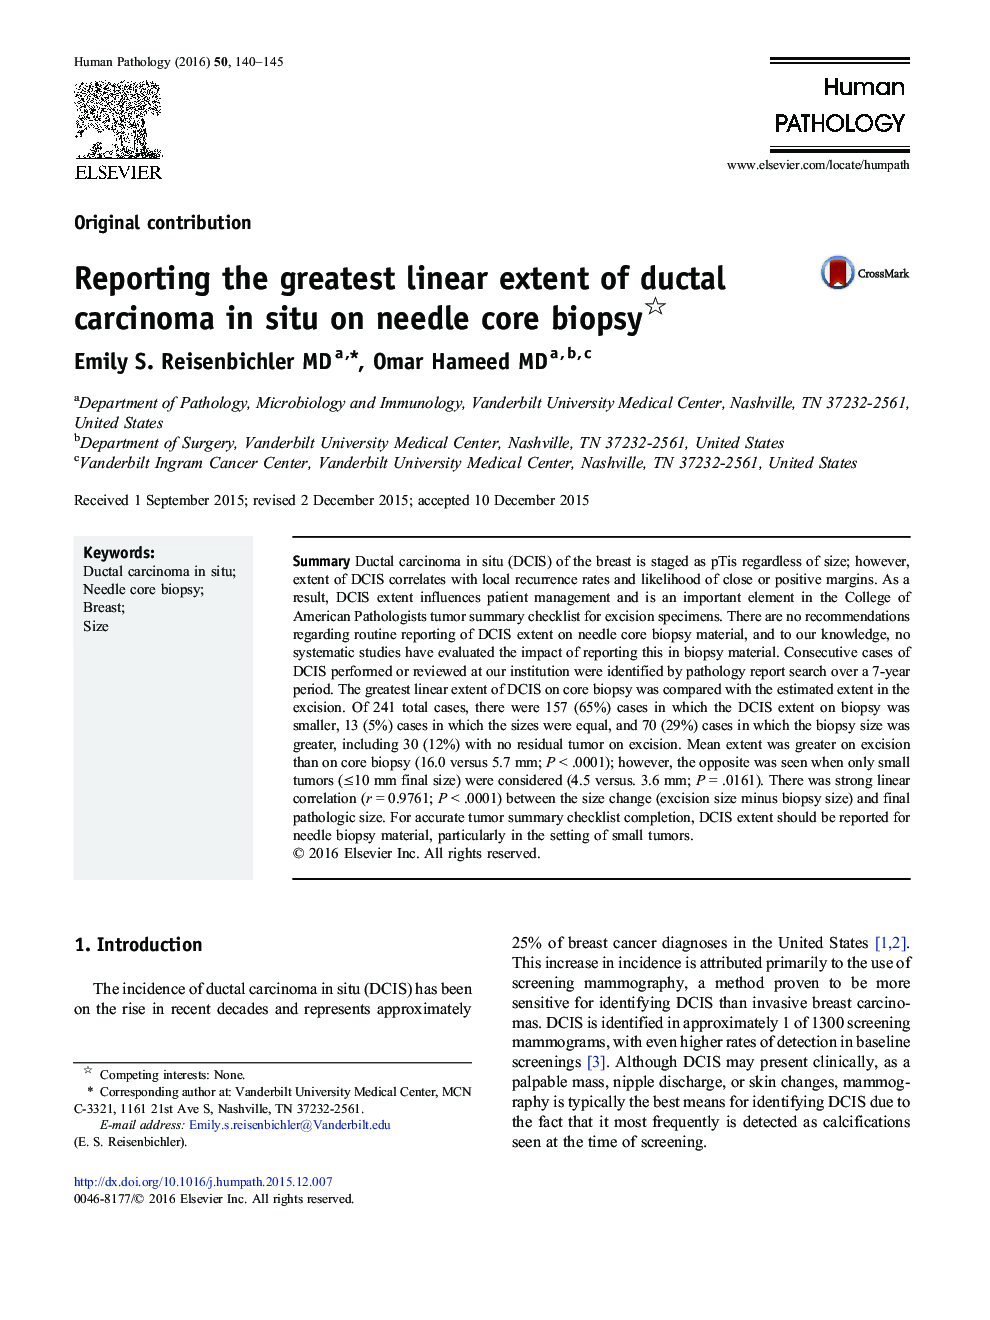 Reporting the greatest linear extent of ductal carcinoma in situ on needle core biopsy